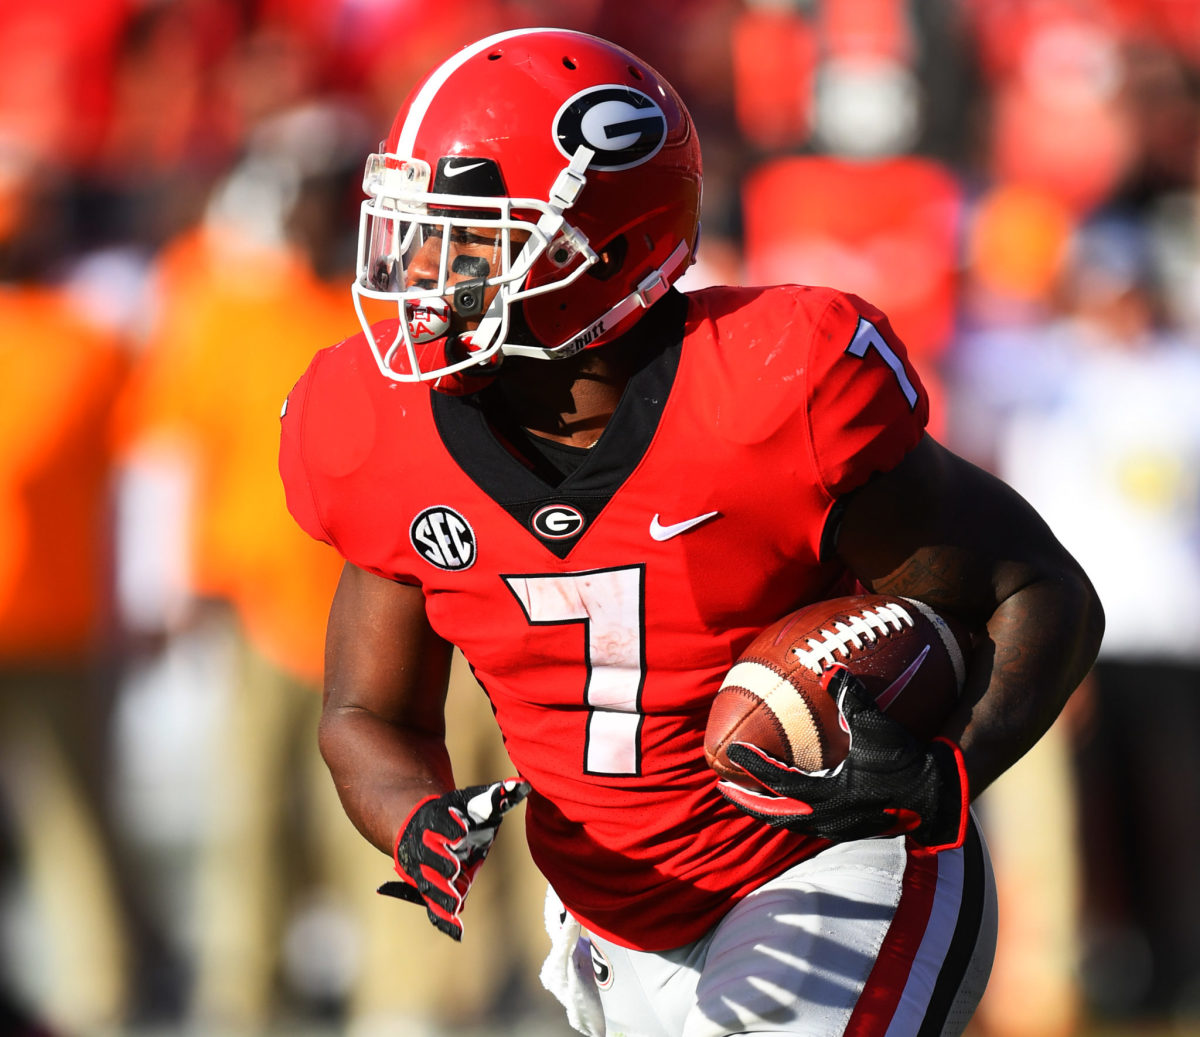 Georgia running back D'Andre Swift carries the ball.